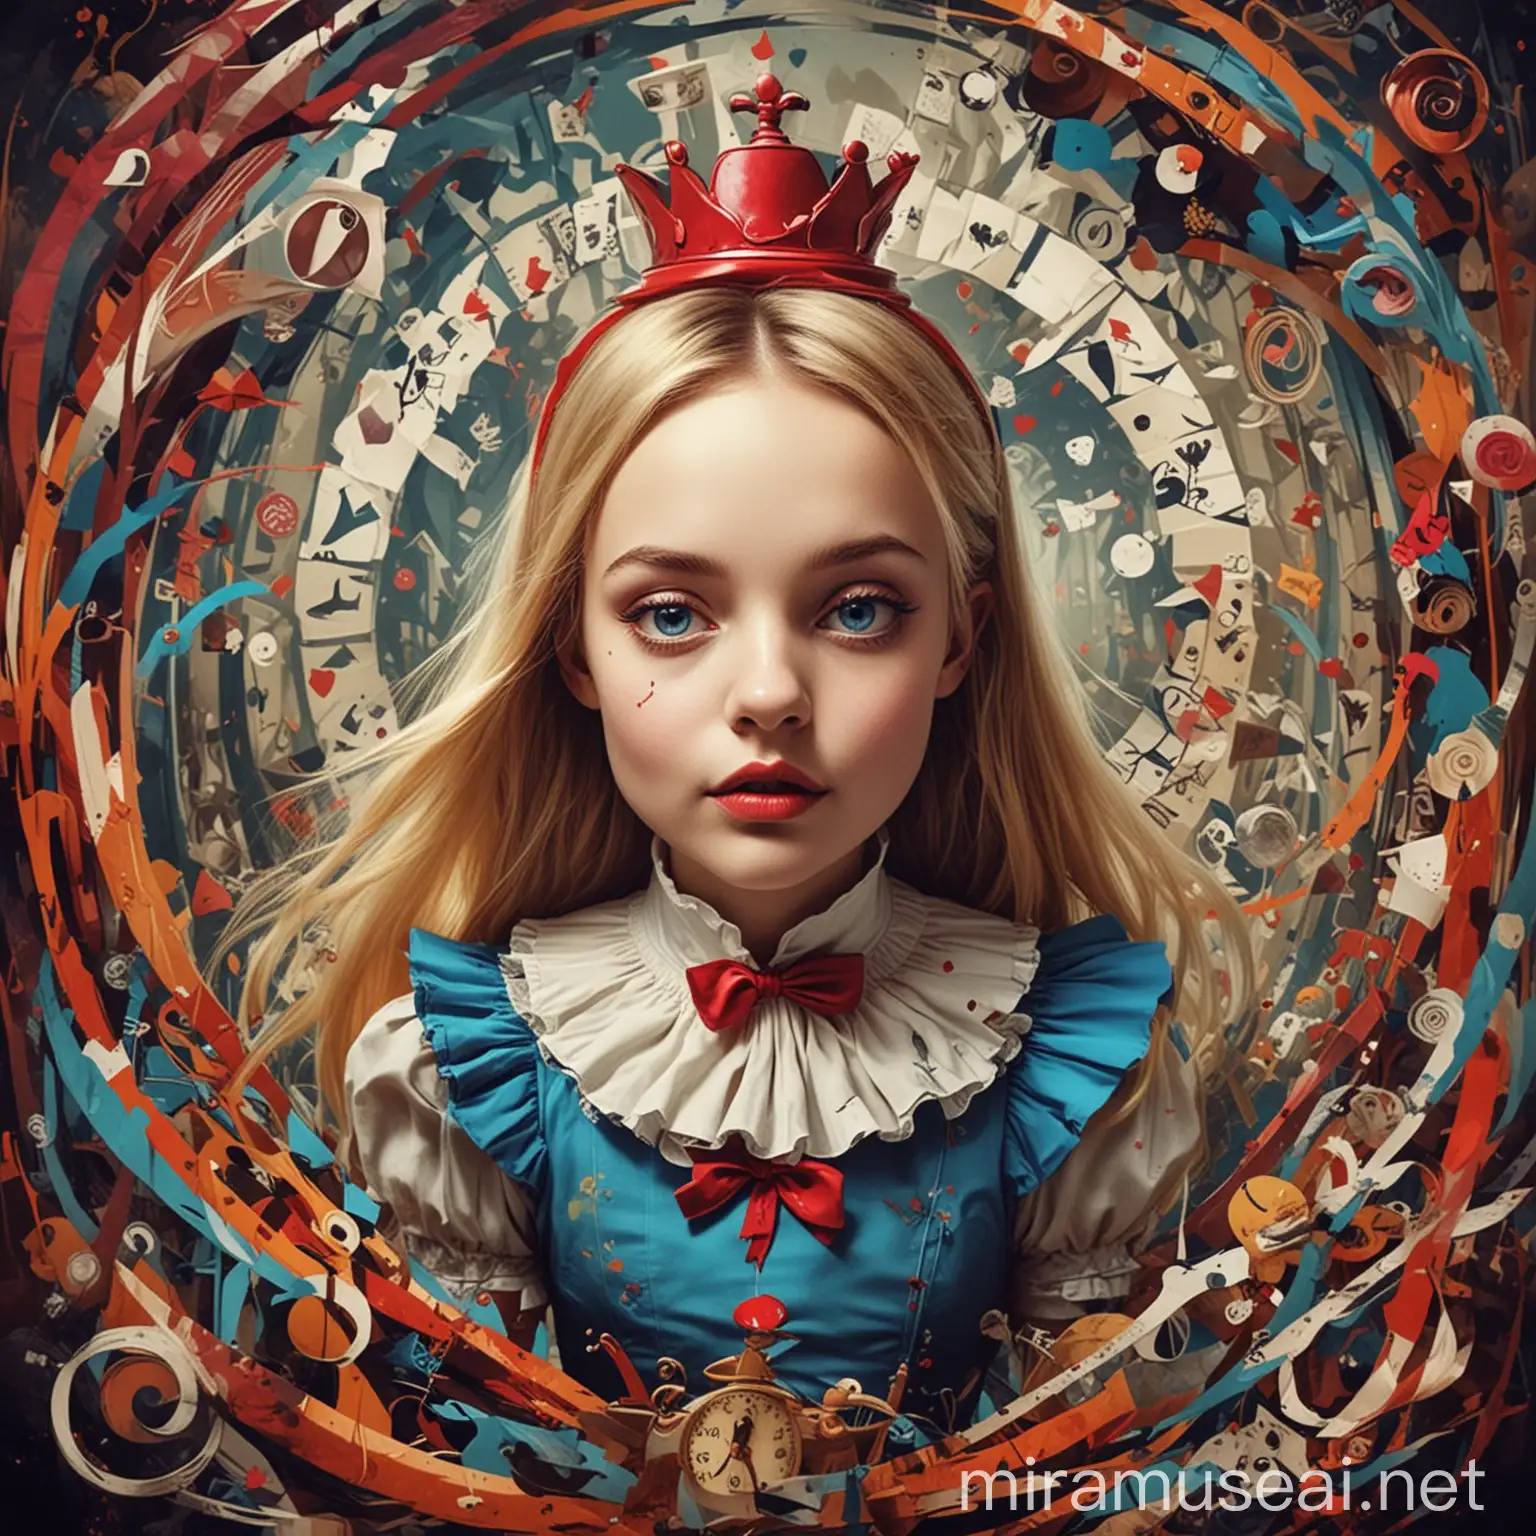 Alice in Wonderland Abstract Art Whimsical Interpretation of a Classic Tale